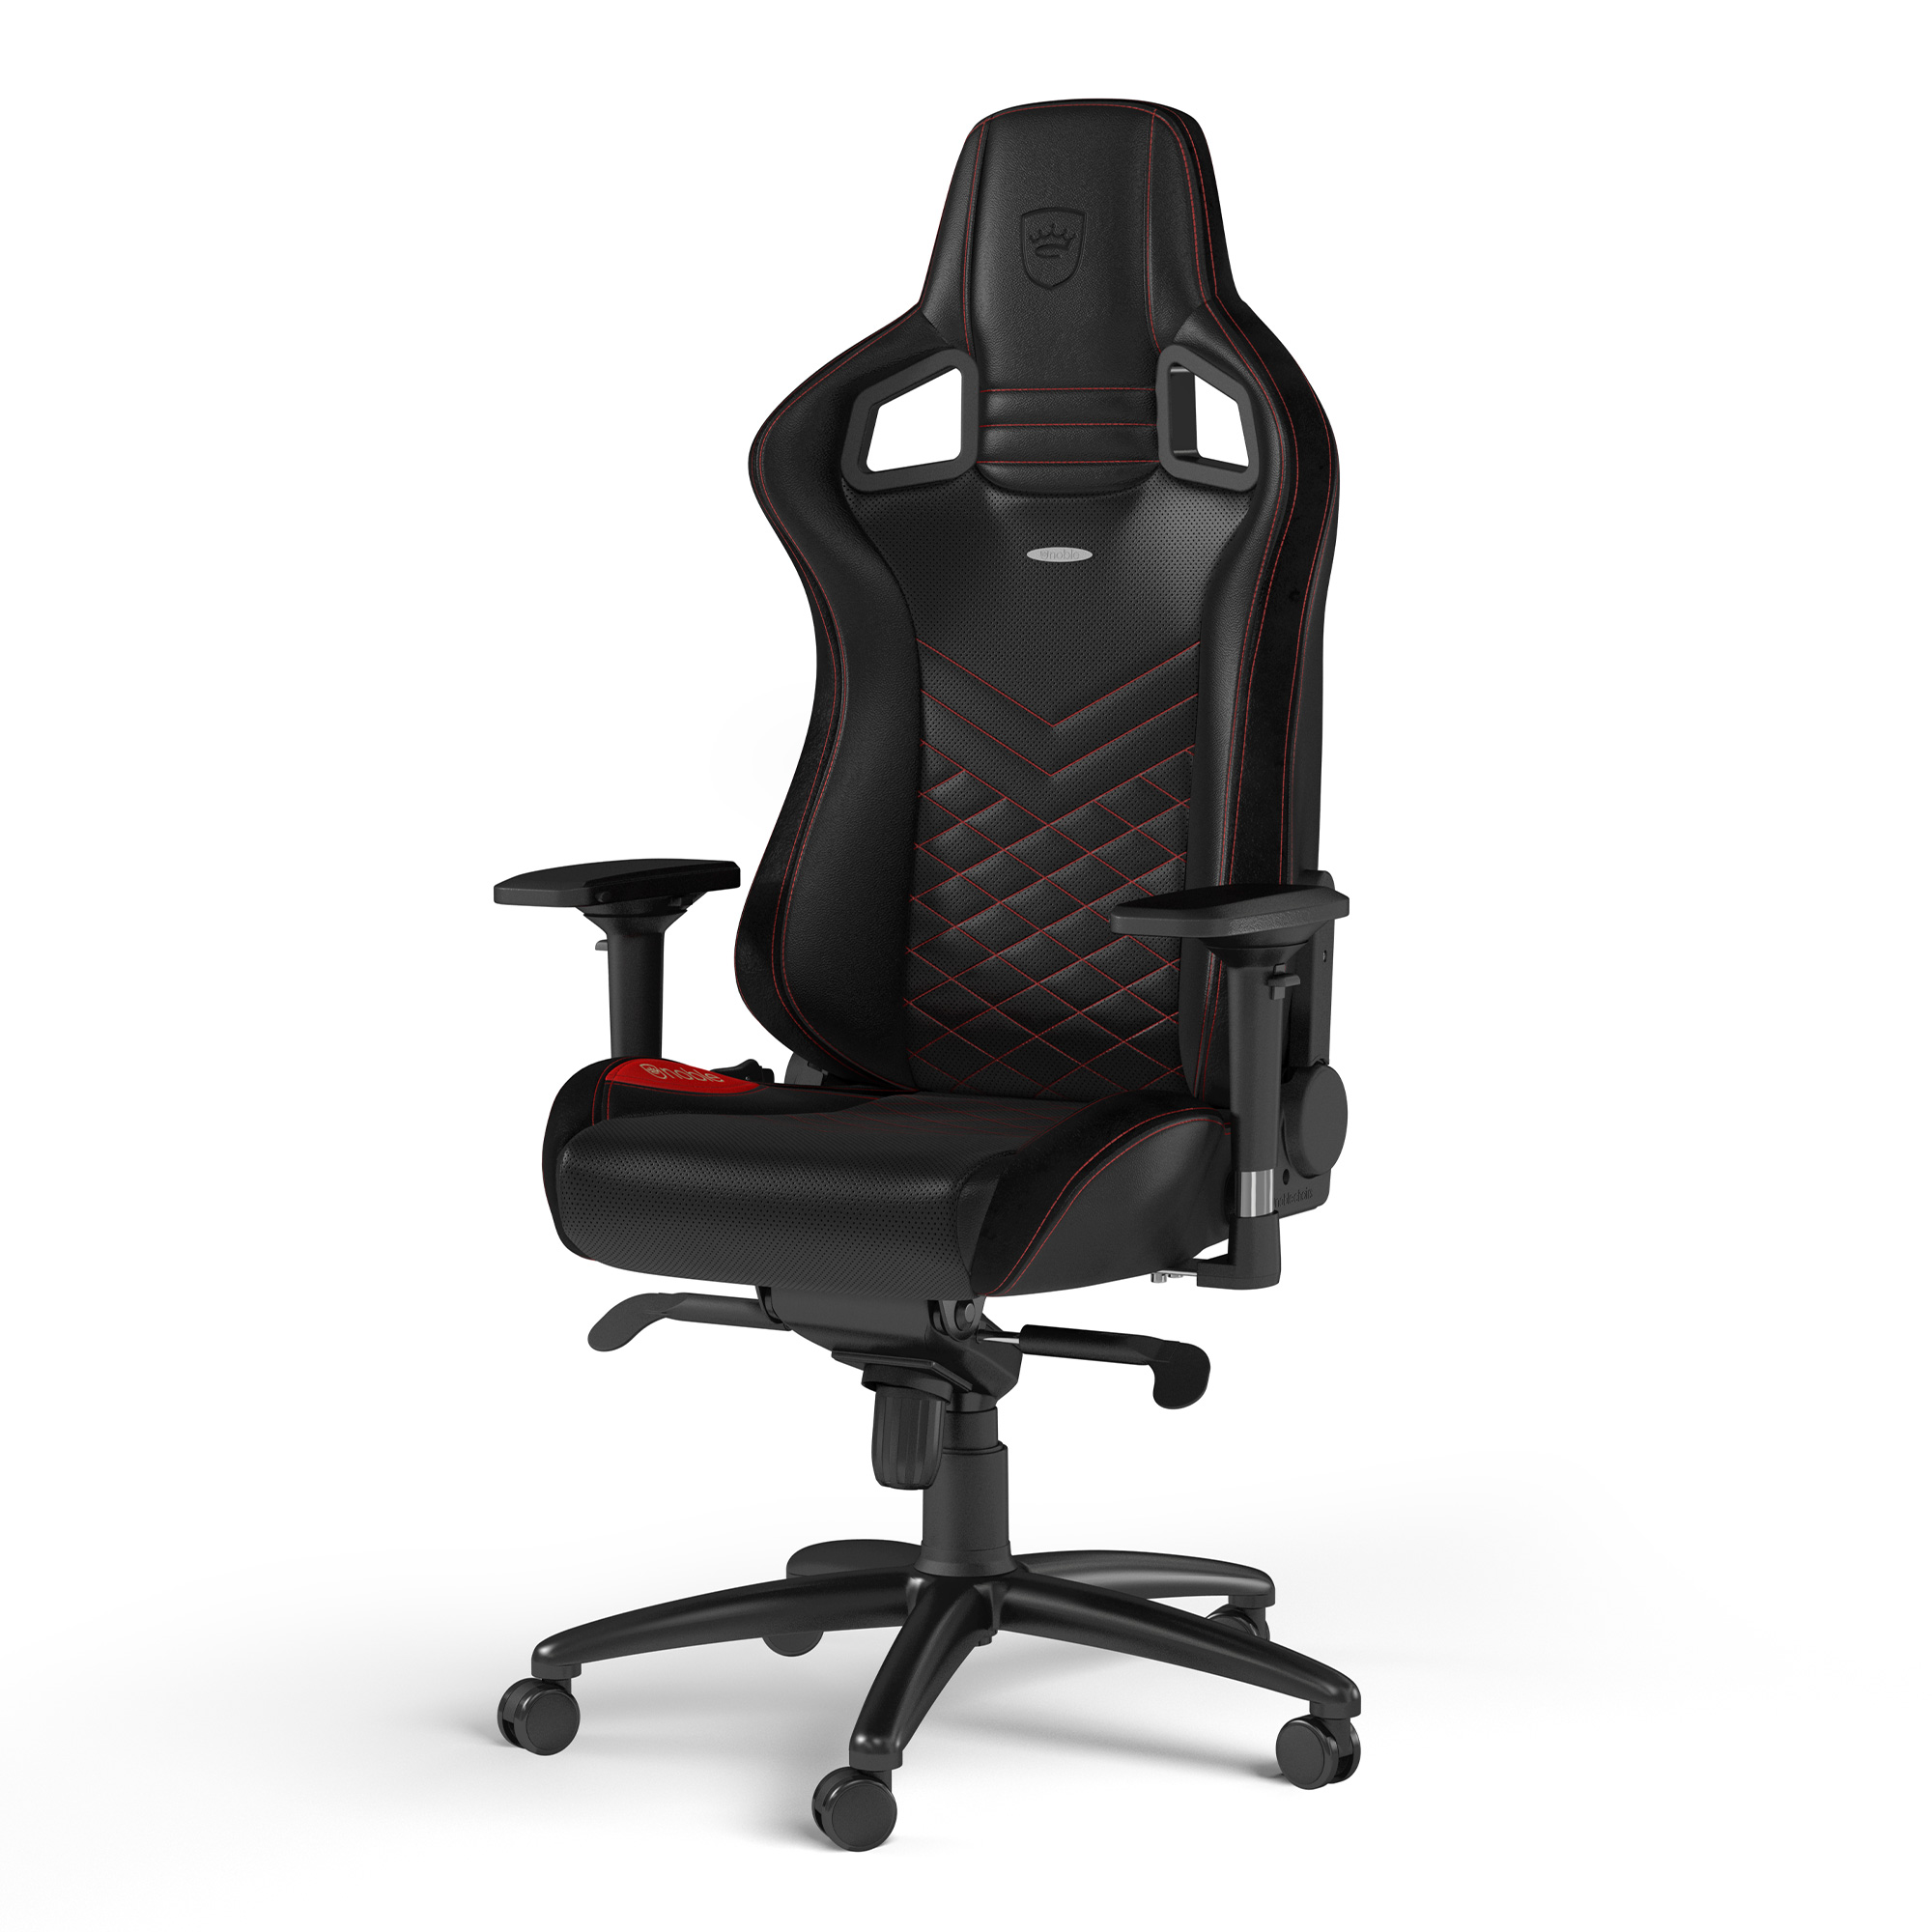 noblechairs - noblechairs EPIC Gaming Chair - Black/Red